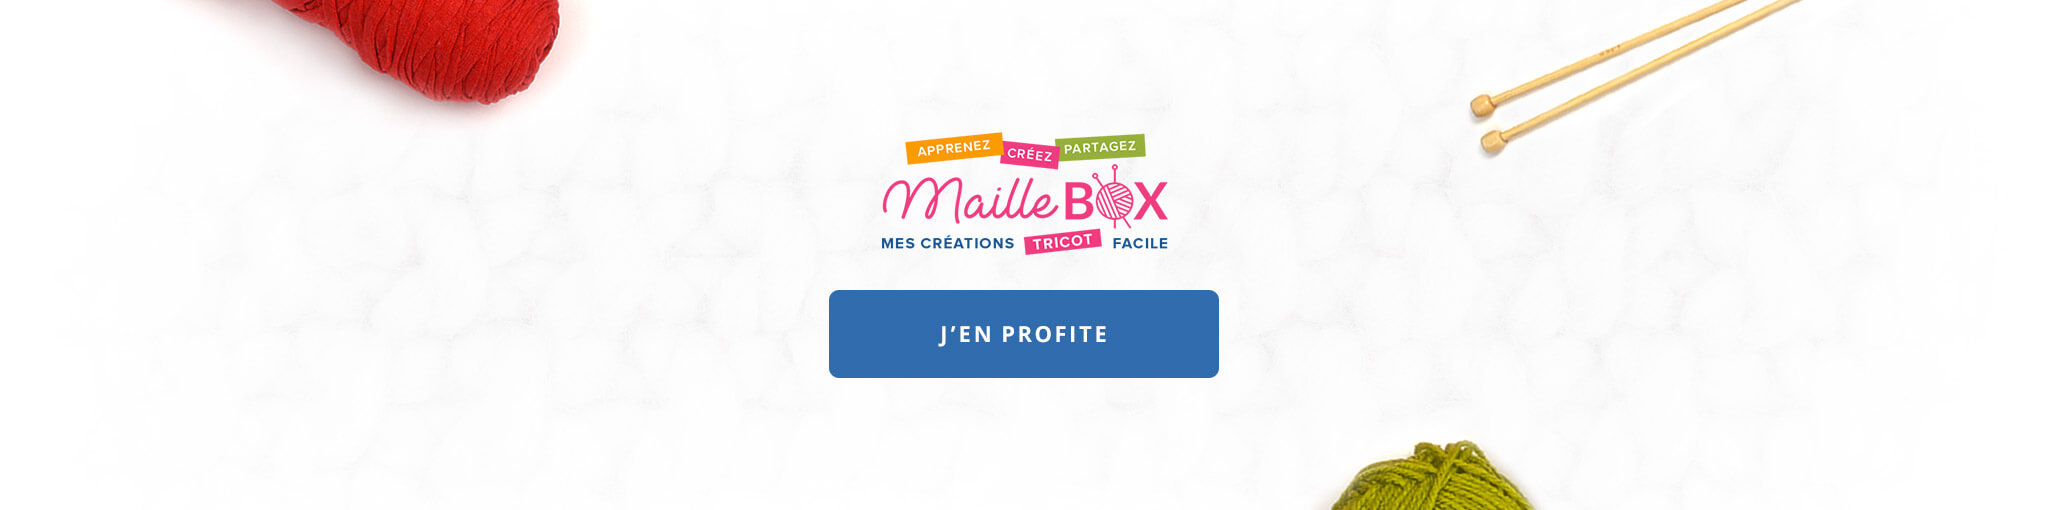 Maille Box